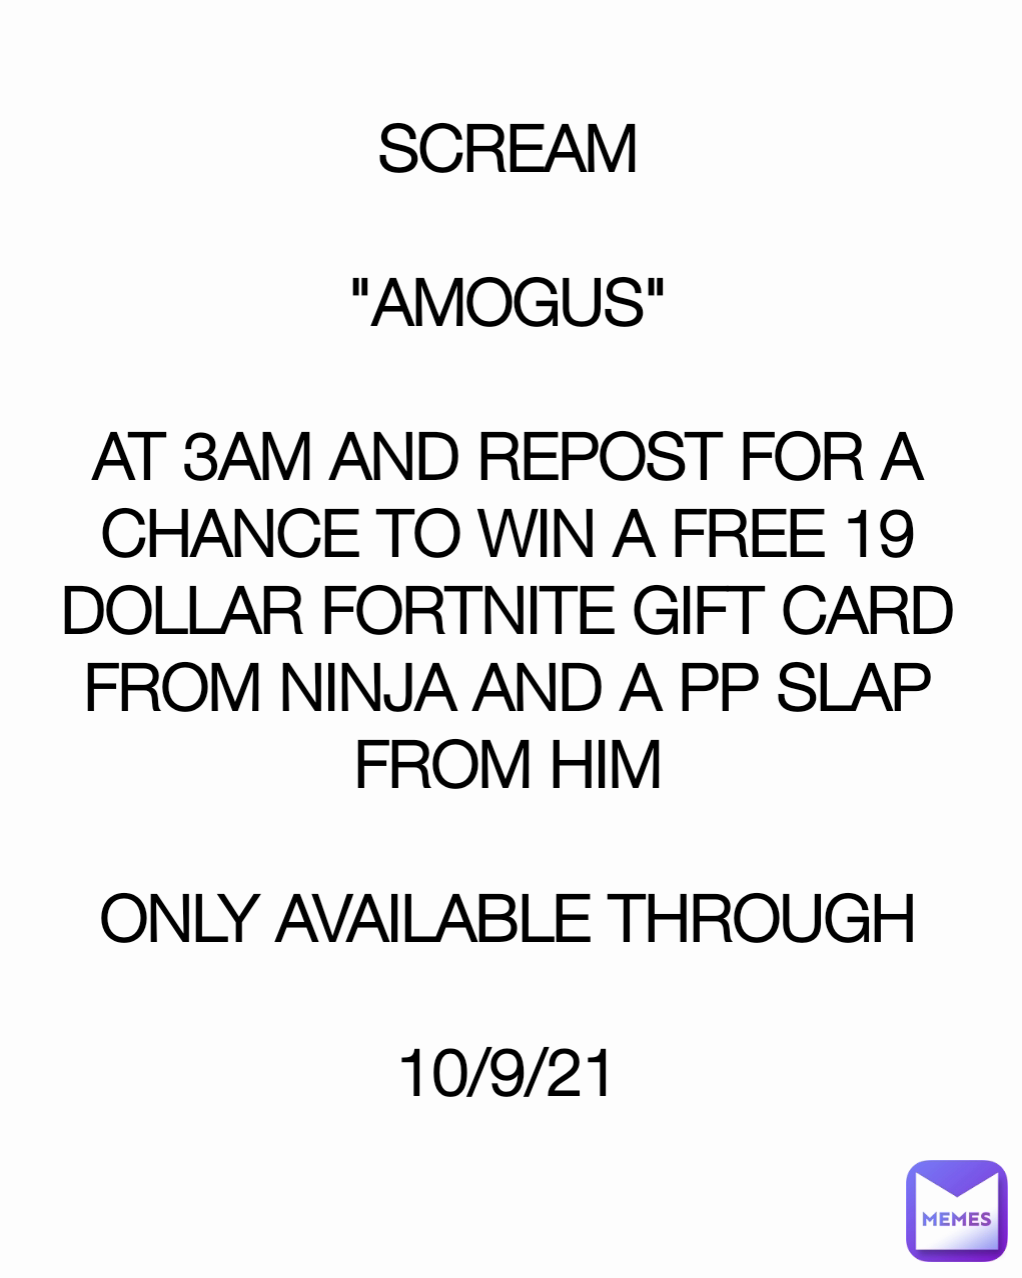 SCREAM

"AMOGUS"

AT 3AM AND REPOST FOR A CHANCE TO WIN A FREE 19 DOLLAR FORTNITE GIFT CARD FROM NINJA AND A PP SLAP FROM HIM

ONLY AVAILABLE THROUGH

10/9/21